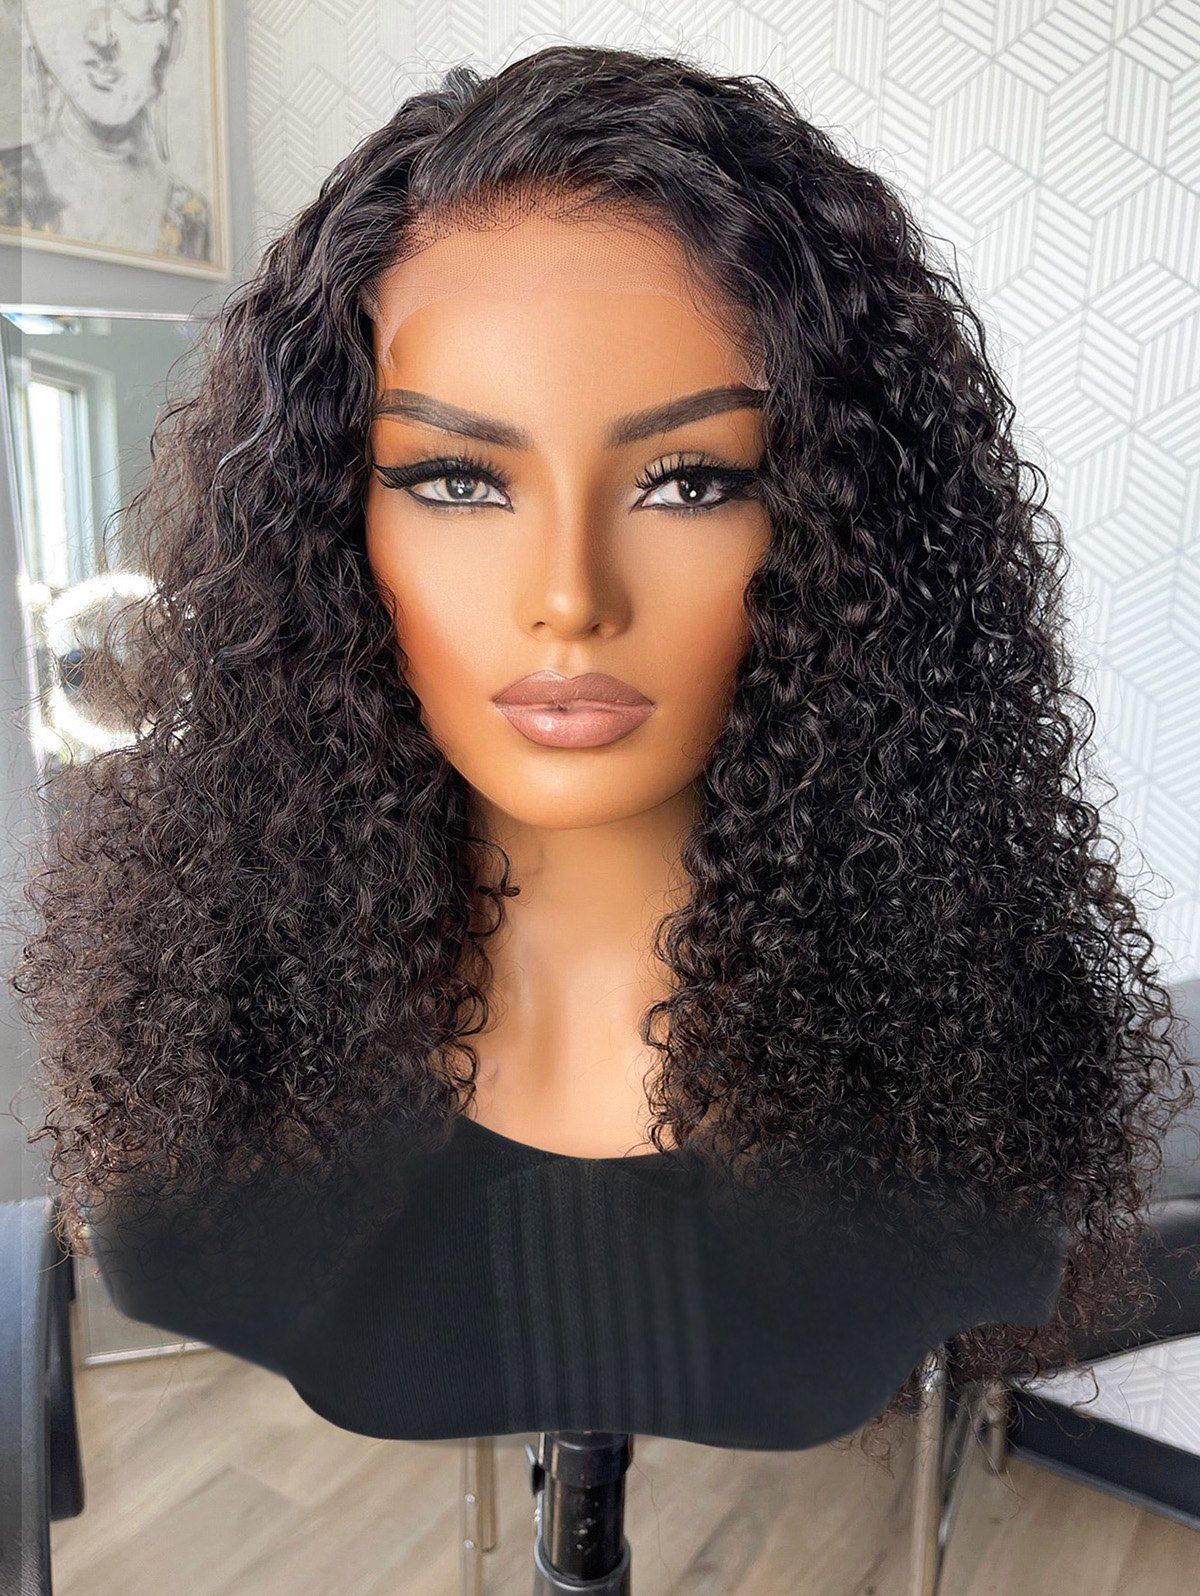 13*4 Lace Front 130% Deep Curly Human Hair Wig - BLACK 14INCH